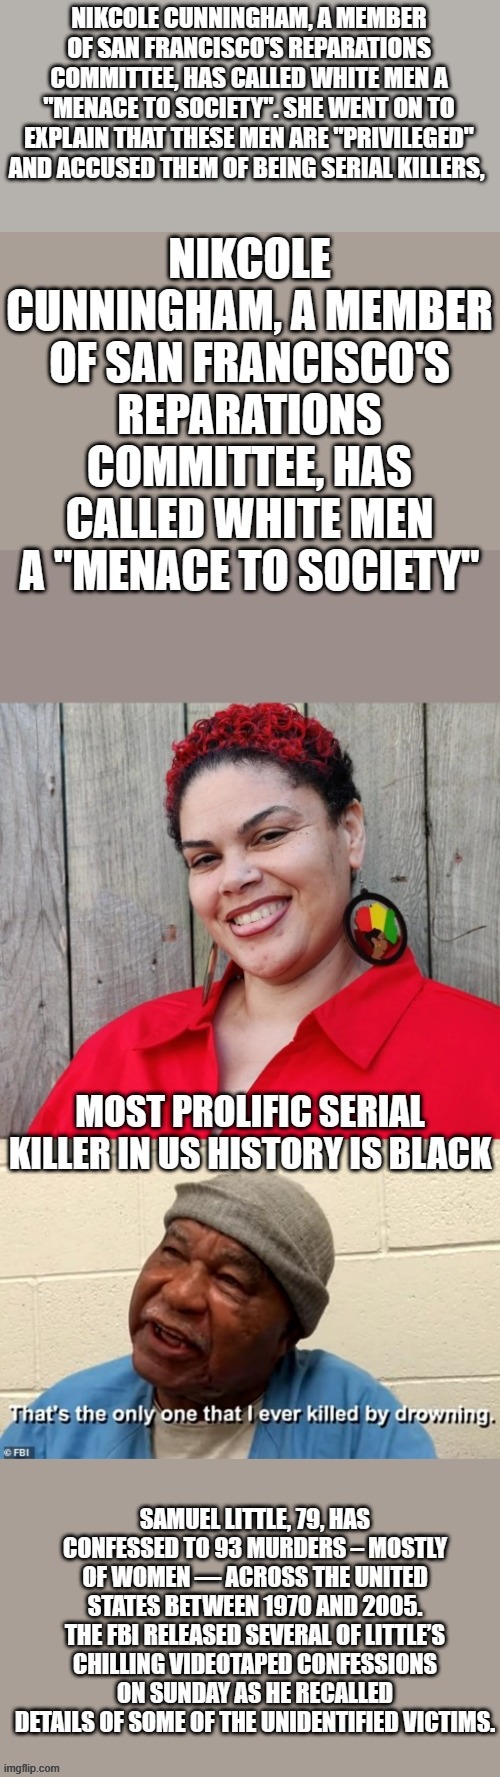 They should educate themselves before spewing their black Racisum. | NIKCOLE CUNNINGHAM, A MEMBER OF SAN FRANCISCO'S REPARATIONS COMMITTEE, HAS CALLED WHITE MEN A "MENACE TO SOCIETY". SHE WENT ON TO EXPLAIN THAT THESE MEN ARE "PRIVILEGED" AND ACCUSED THEM OF BEING SERIAL KILLERS, | image tagged in democrats,liars,racist | made w/ Imgflip meme maker